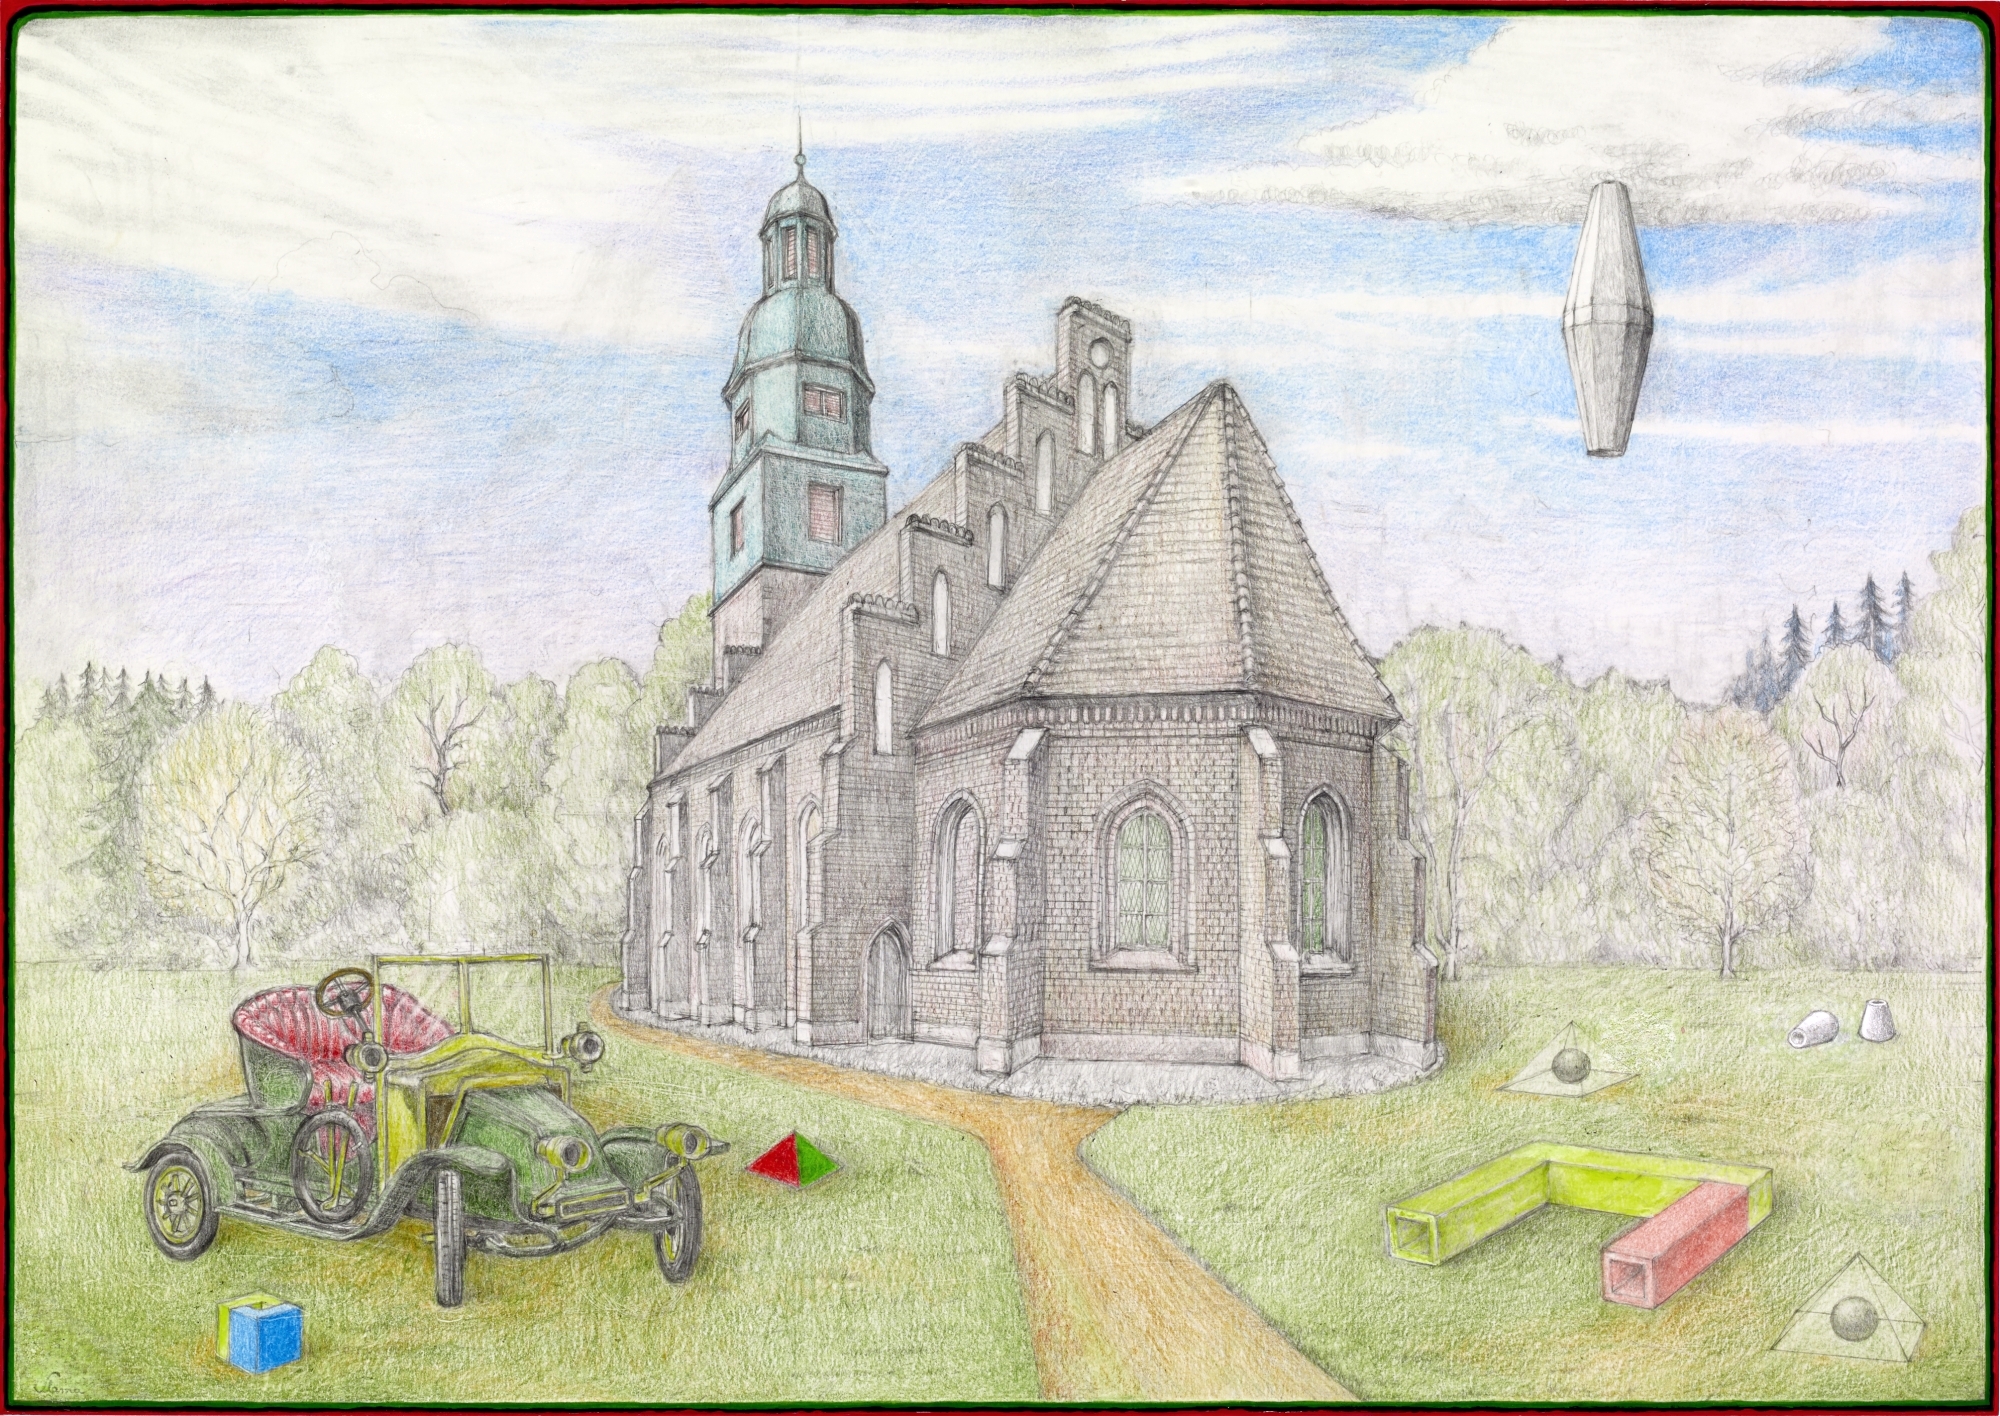 Dionysian Cult Centre with 1911 Renault 2-Seater  (297 × 420mm, pencil, coloured pencil, acrylics on paper, © 2013 by the Tellurian Society and Manfred Gorre)